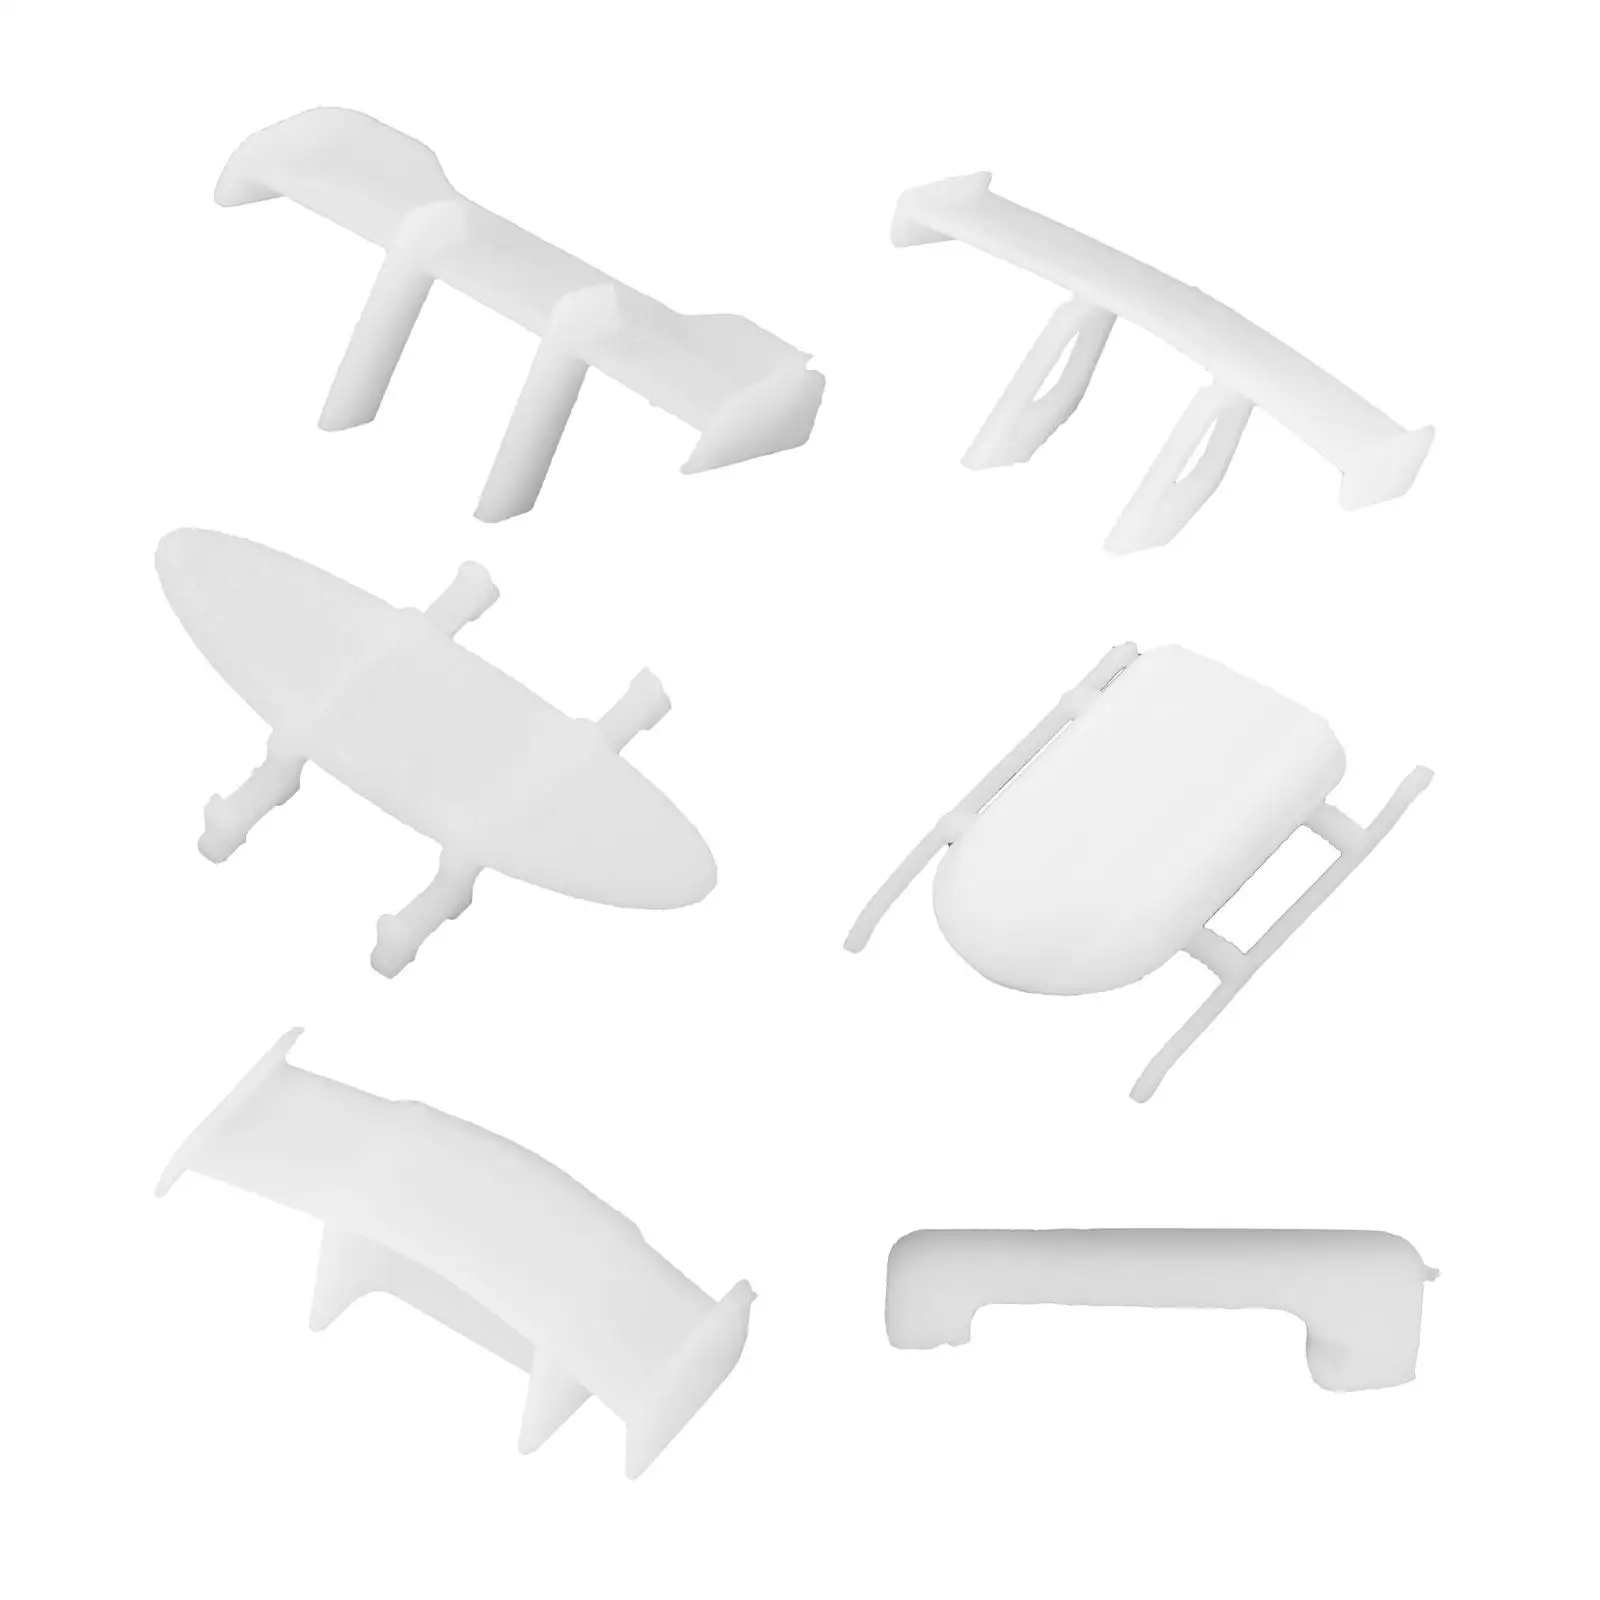 Plastic 1:64 Scale Alloy Model Car Spoiler Tail Wing Luggage Rack Parts DIY Upgrades Accessory cmr c80b gondola car ho scale 1 87 plastic wheel toy freight compartment train model toy train set toy